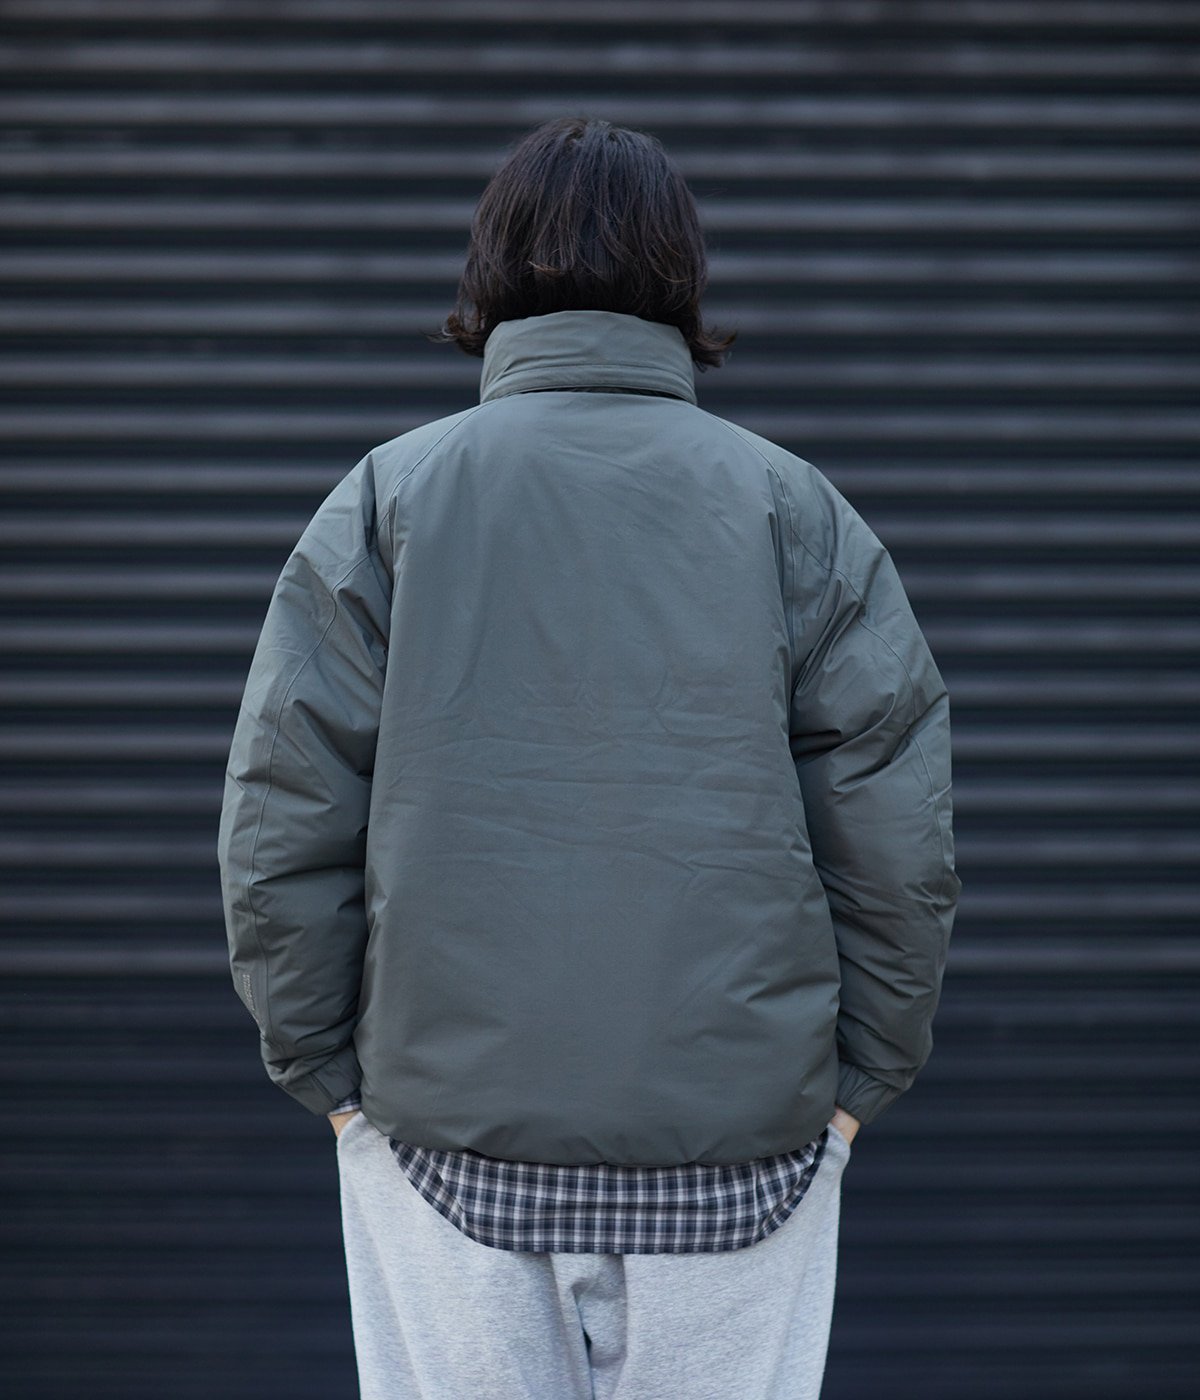 【ONLY ARK】別注 Act Rover Jacket